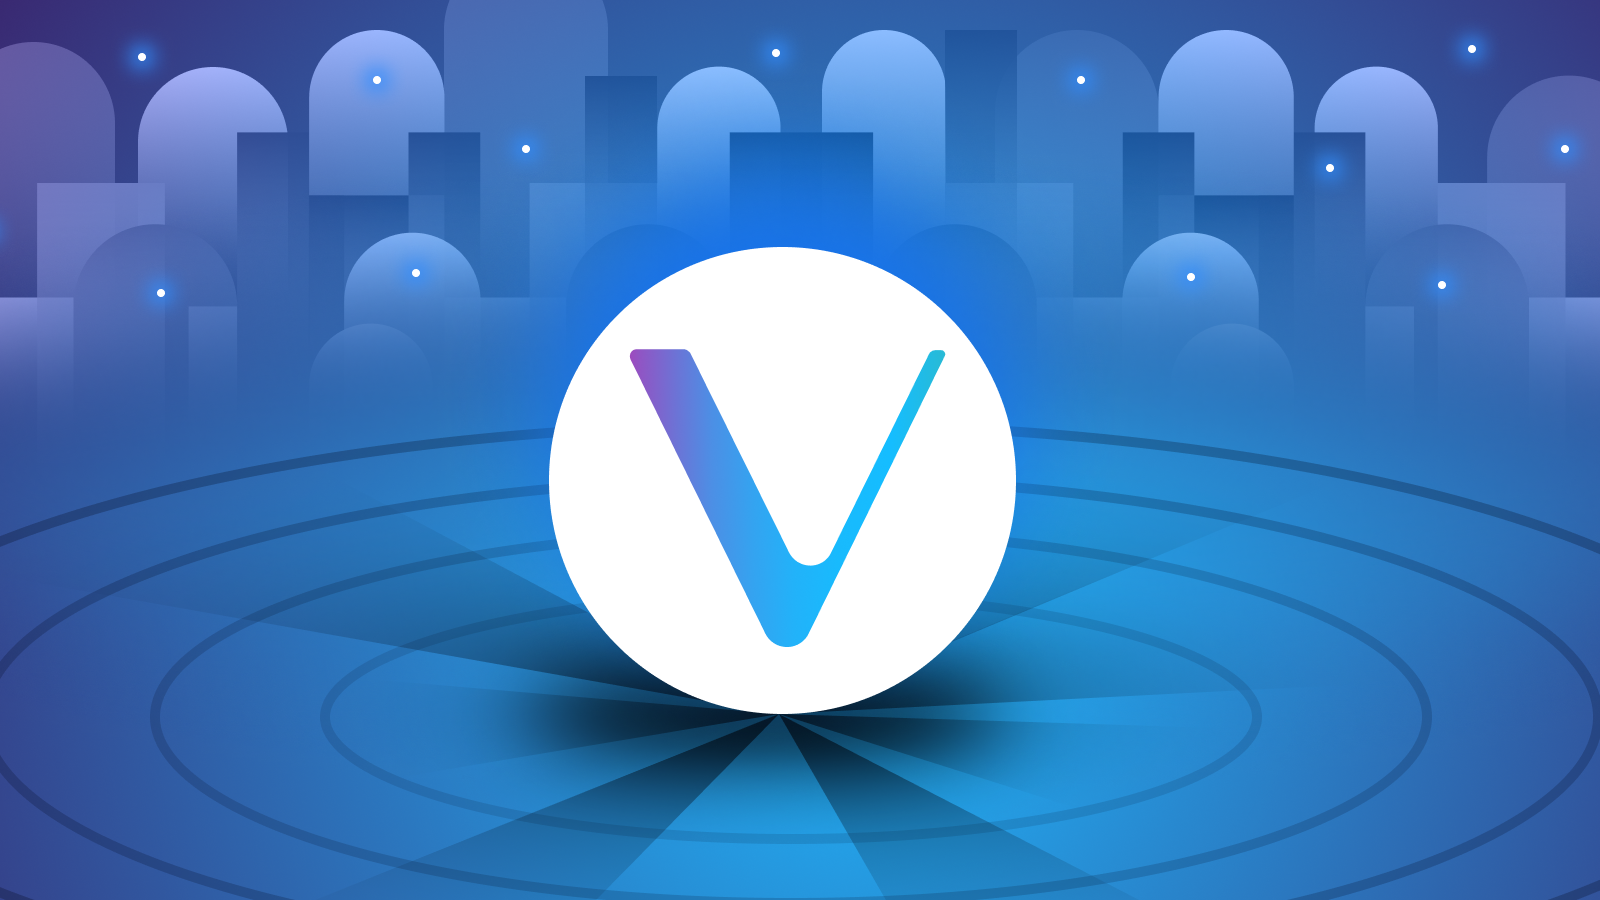 How to Trade Vechain - Guide to Buying and Selling VET Tokens | Coin Guru